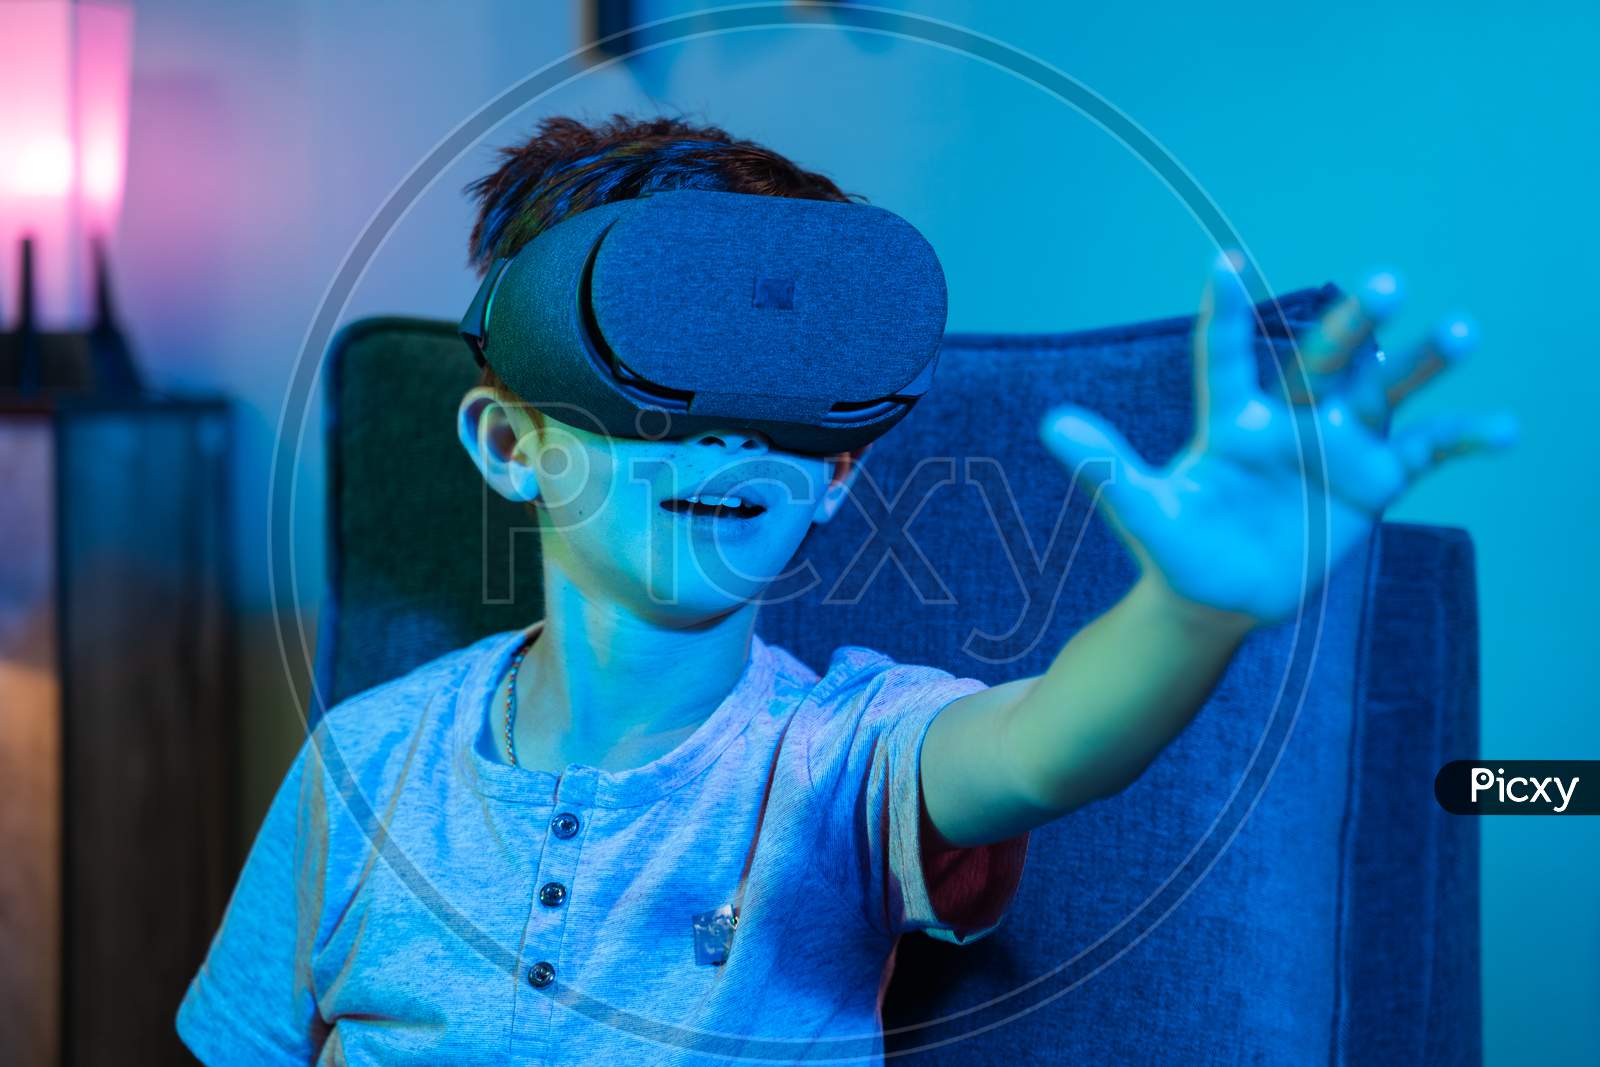 Young Kid With Vr Or Virtual Reality Headset Feeling Or Enjoying The 360 Degree Virtual Environment - Concept Of Showing Futuristic Of Modern Vr Technology In Modern Lifestyle.